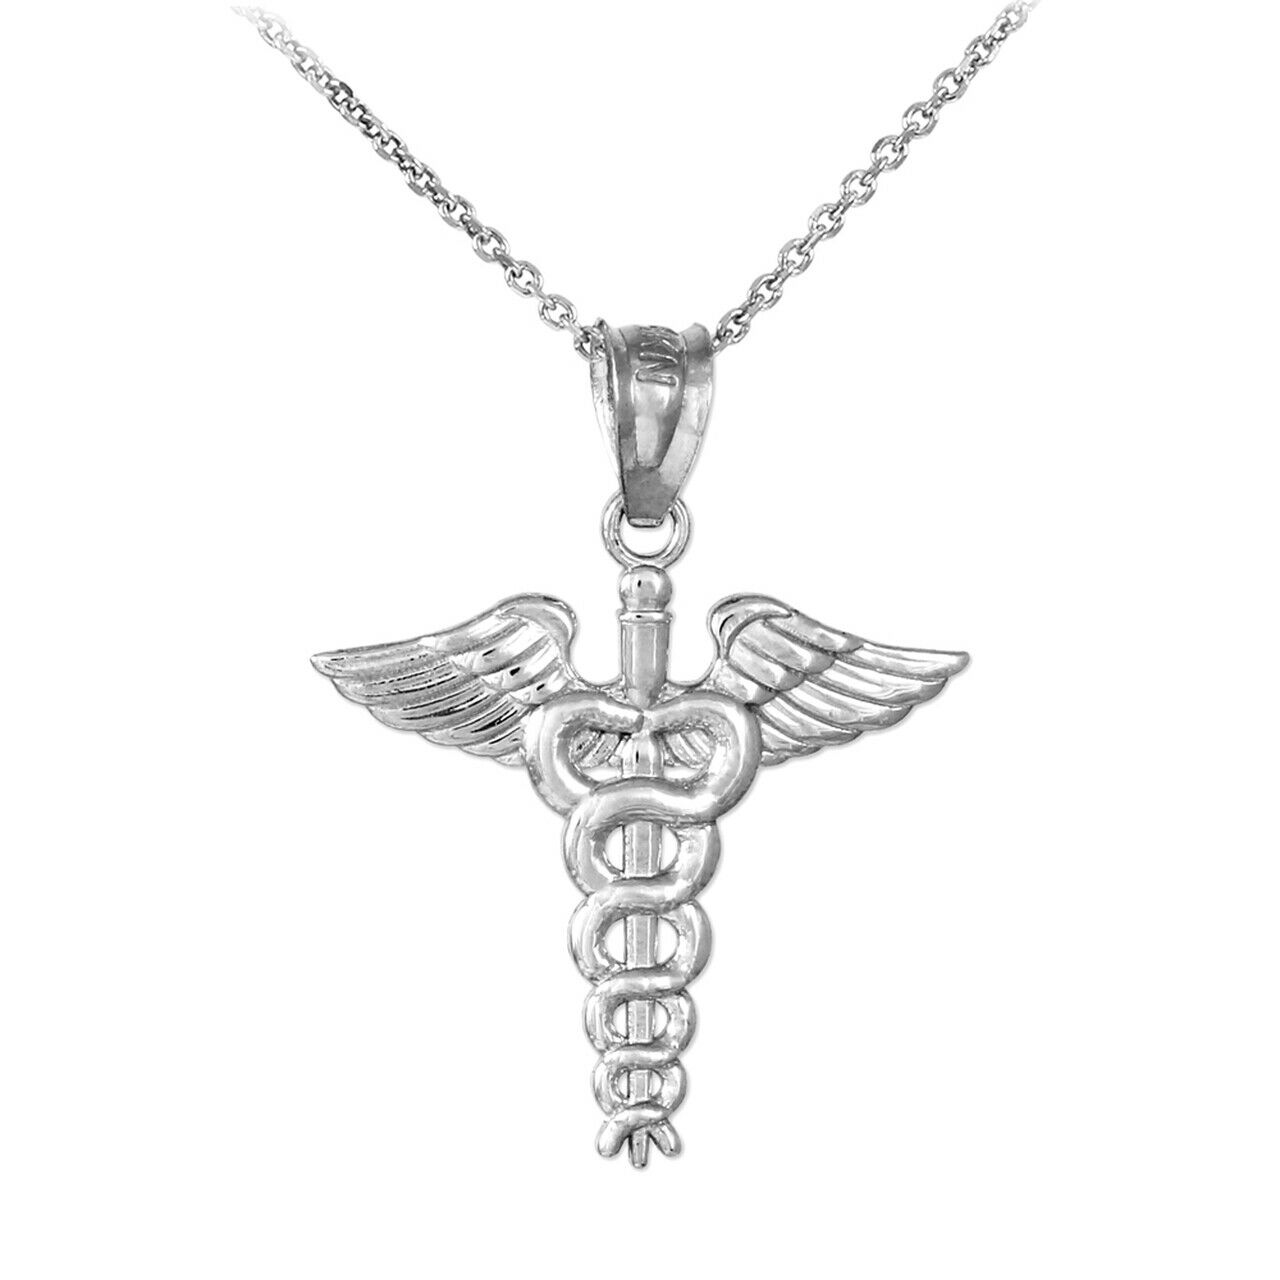 925 Sterling Silver Caduceus Charm Pendant Necklace Made in USA 16",18",20",22"